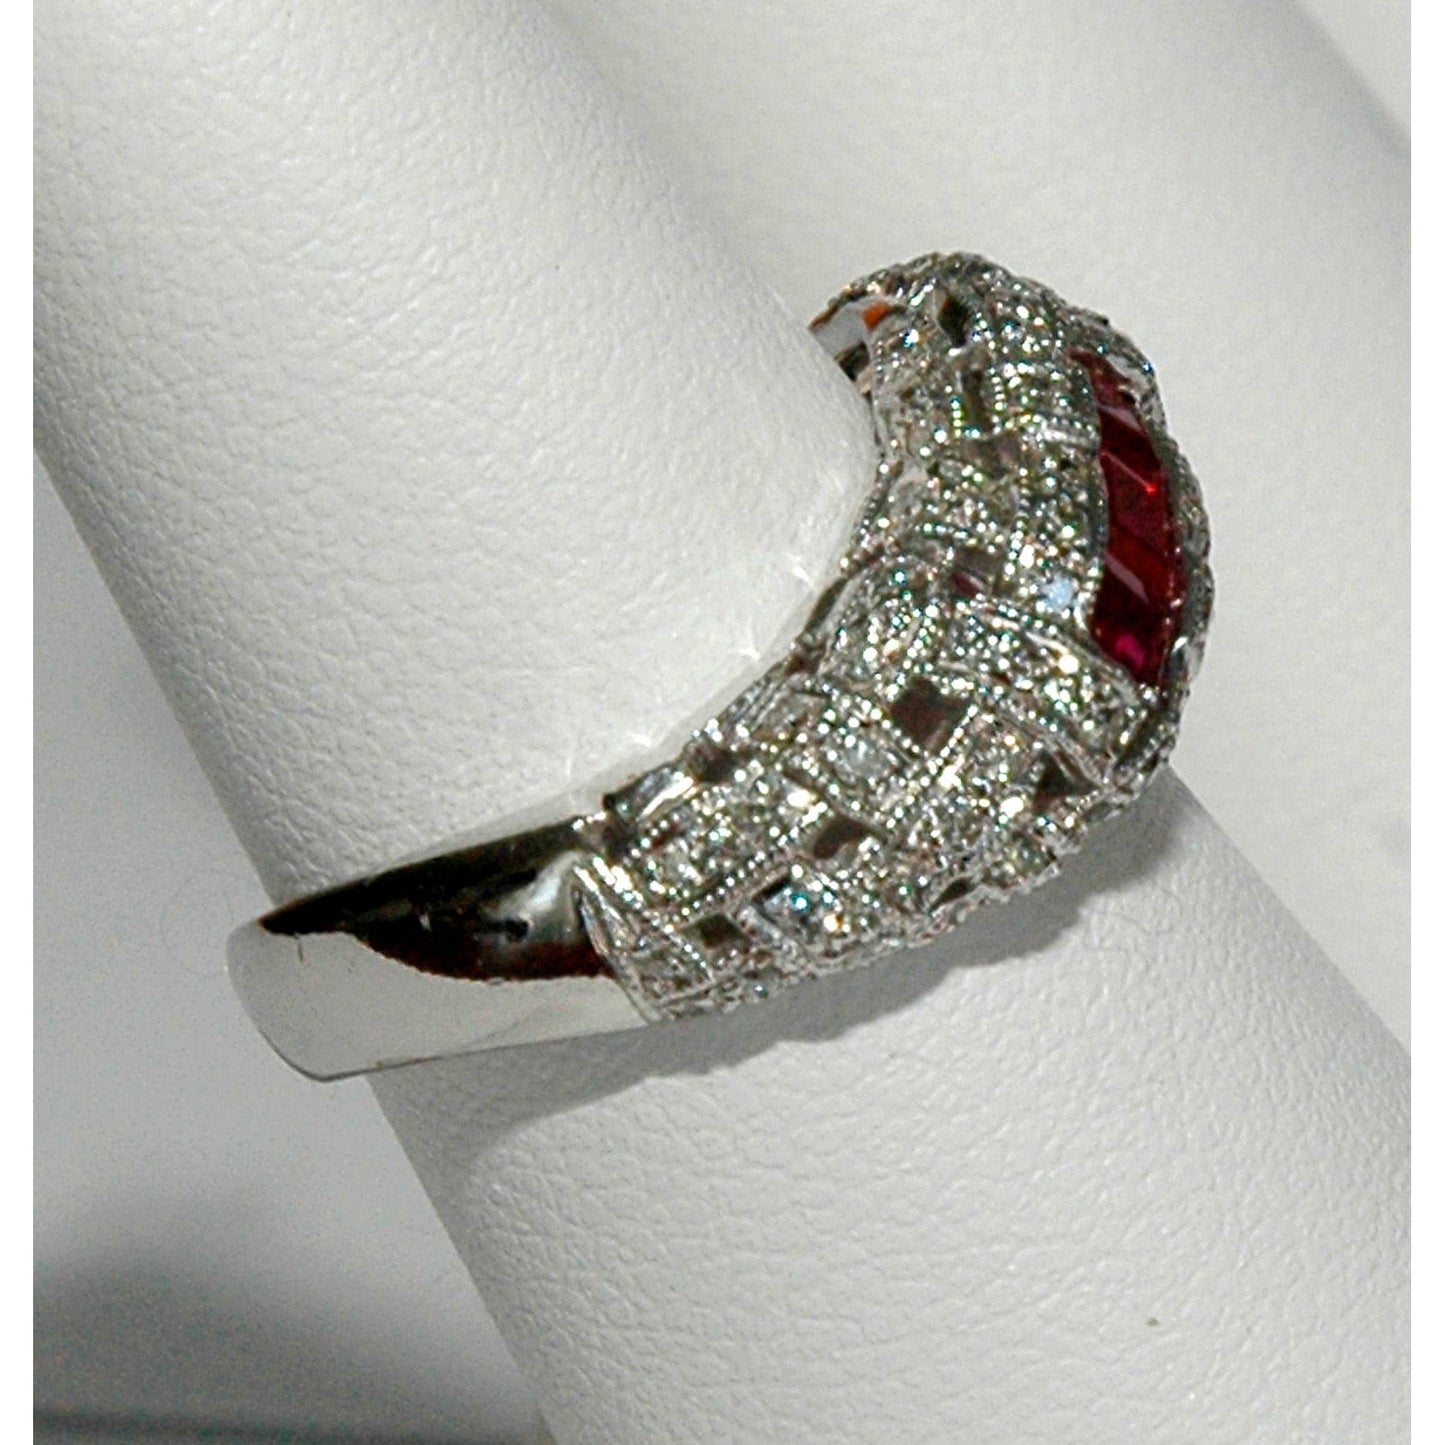 FJL Jewelry Gemstone Ring Square-Ruby & Diamond Ring in 18K Gold, Three Rubies with Diamond Accent, July Birthstone